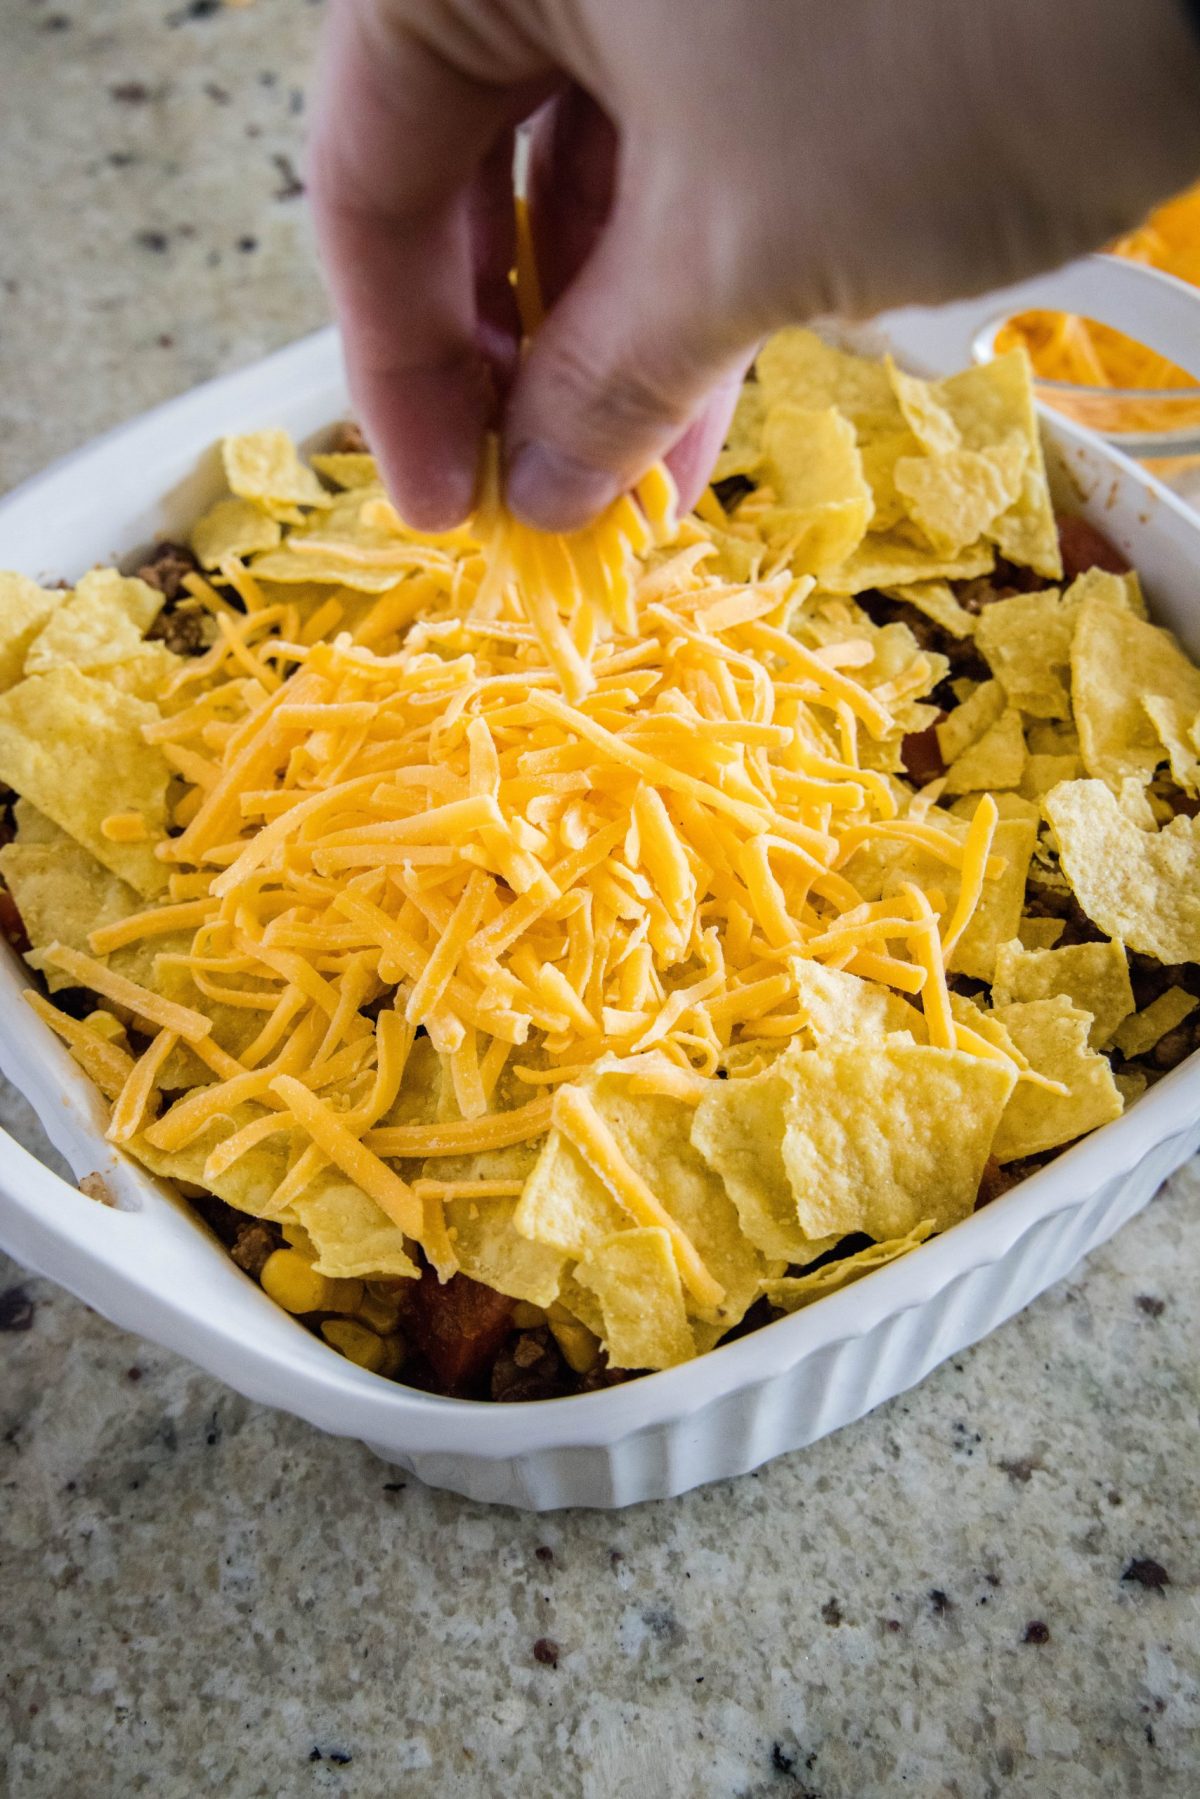 A hand sprinkling shredded cheddar cheese over the top of chips in a baking dish